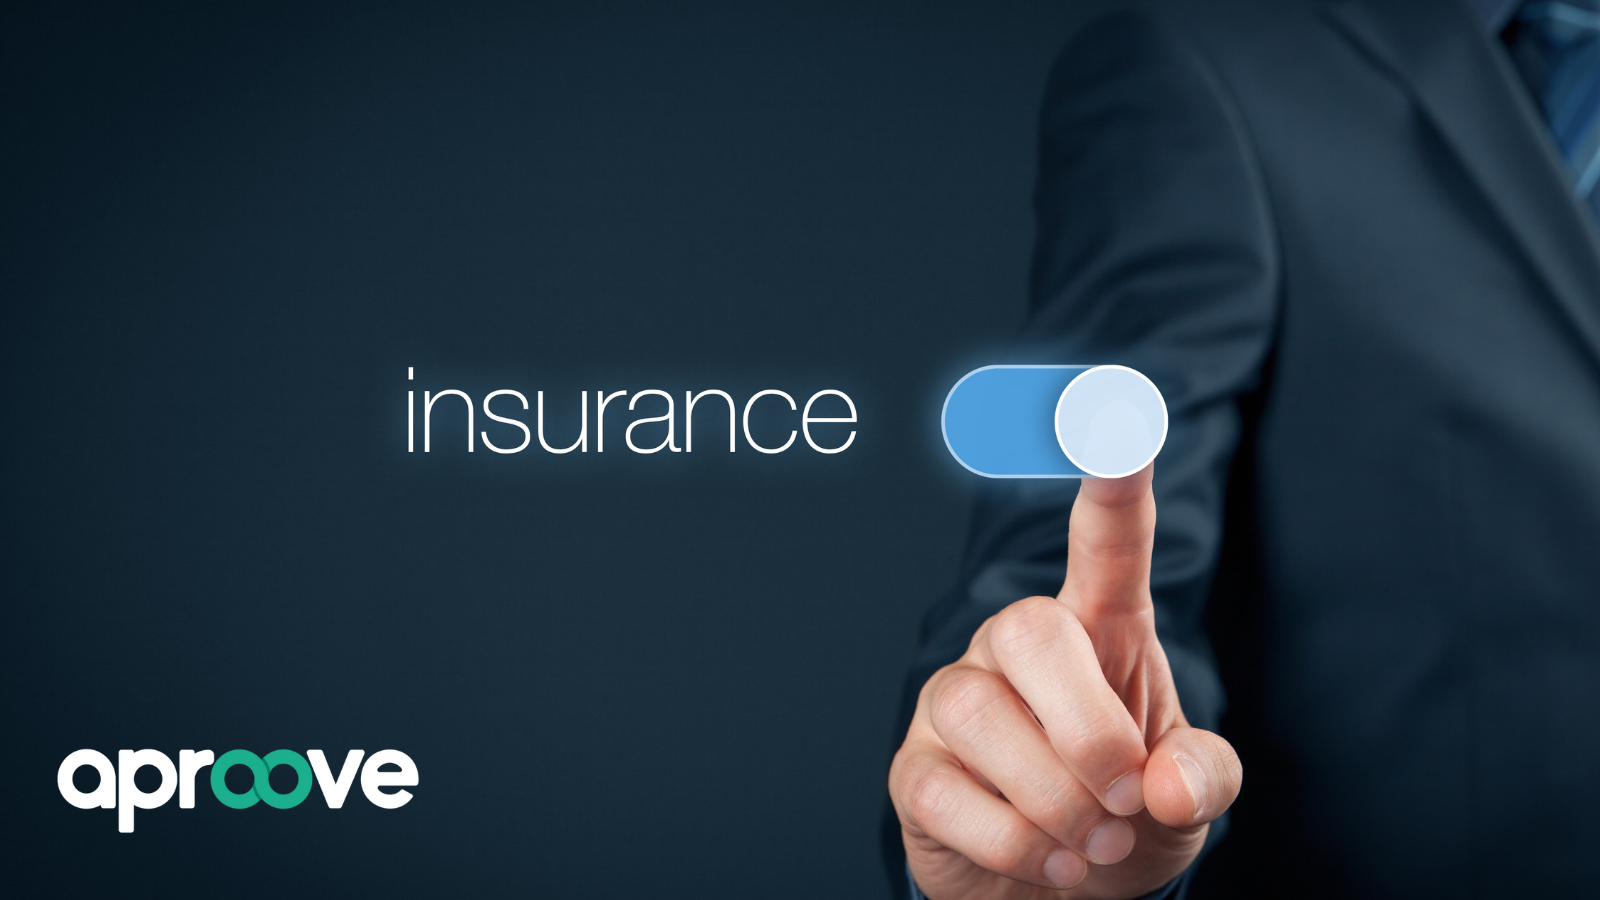 Automate Insurance Processes with Work Management Software - Aproove